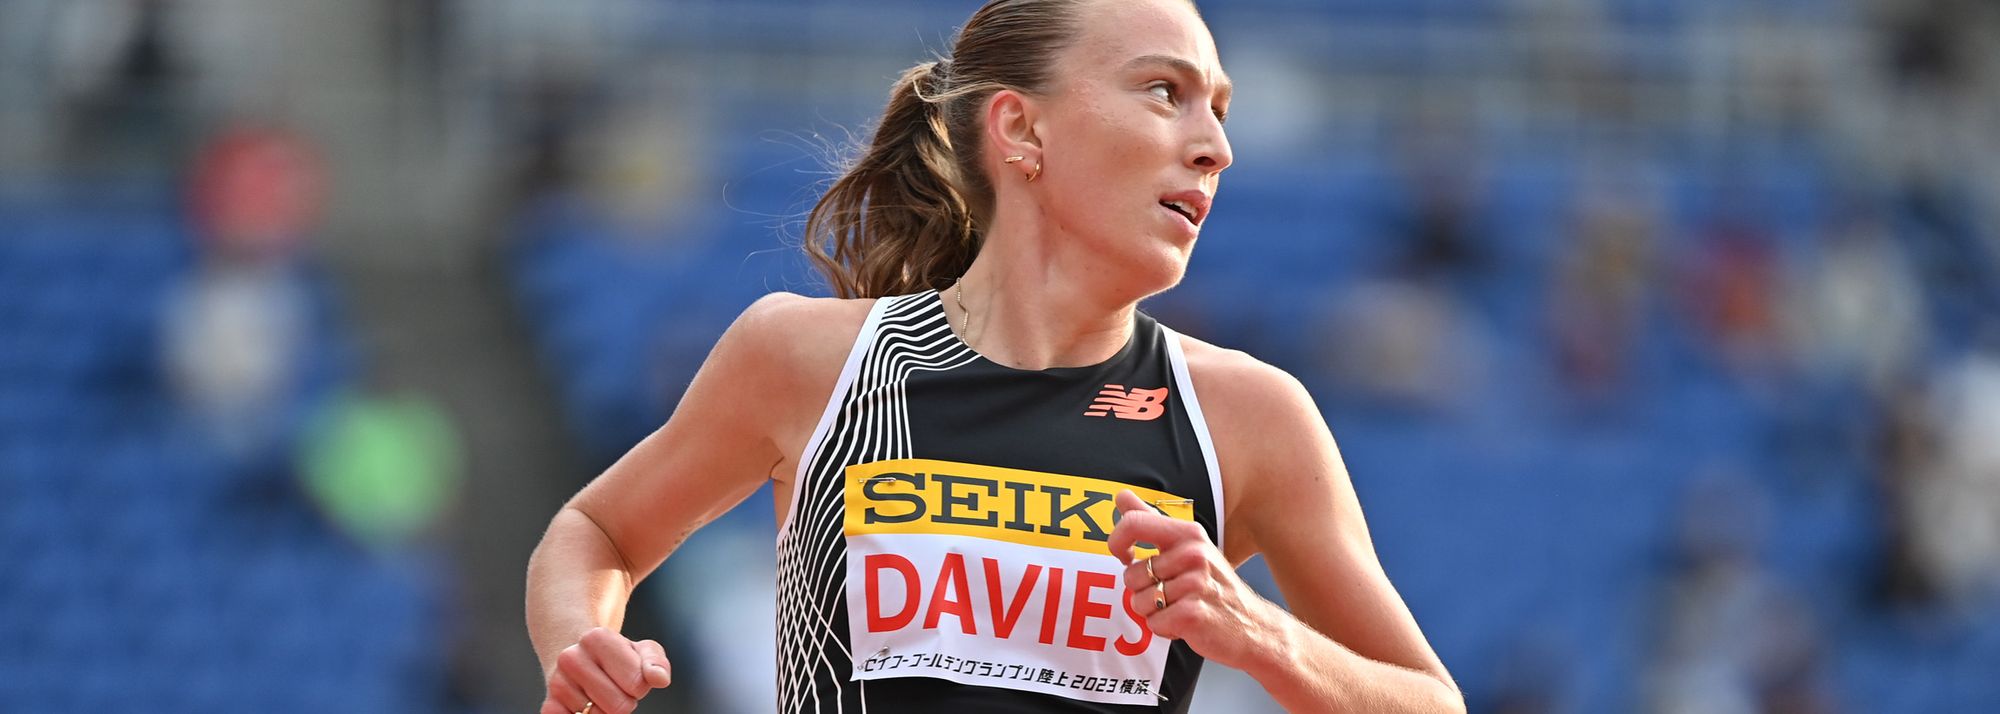 Australia’s Rose Davies continued her breakthrough by taking apart the 5000m meeting record at the Seiko Golden Grand Prix